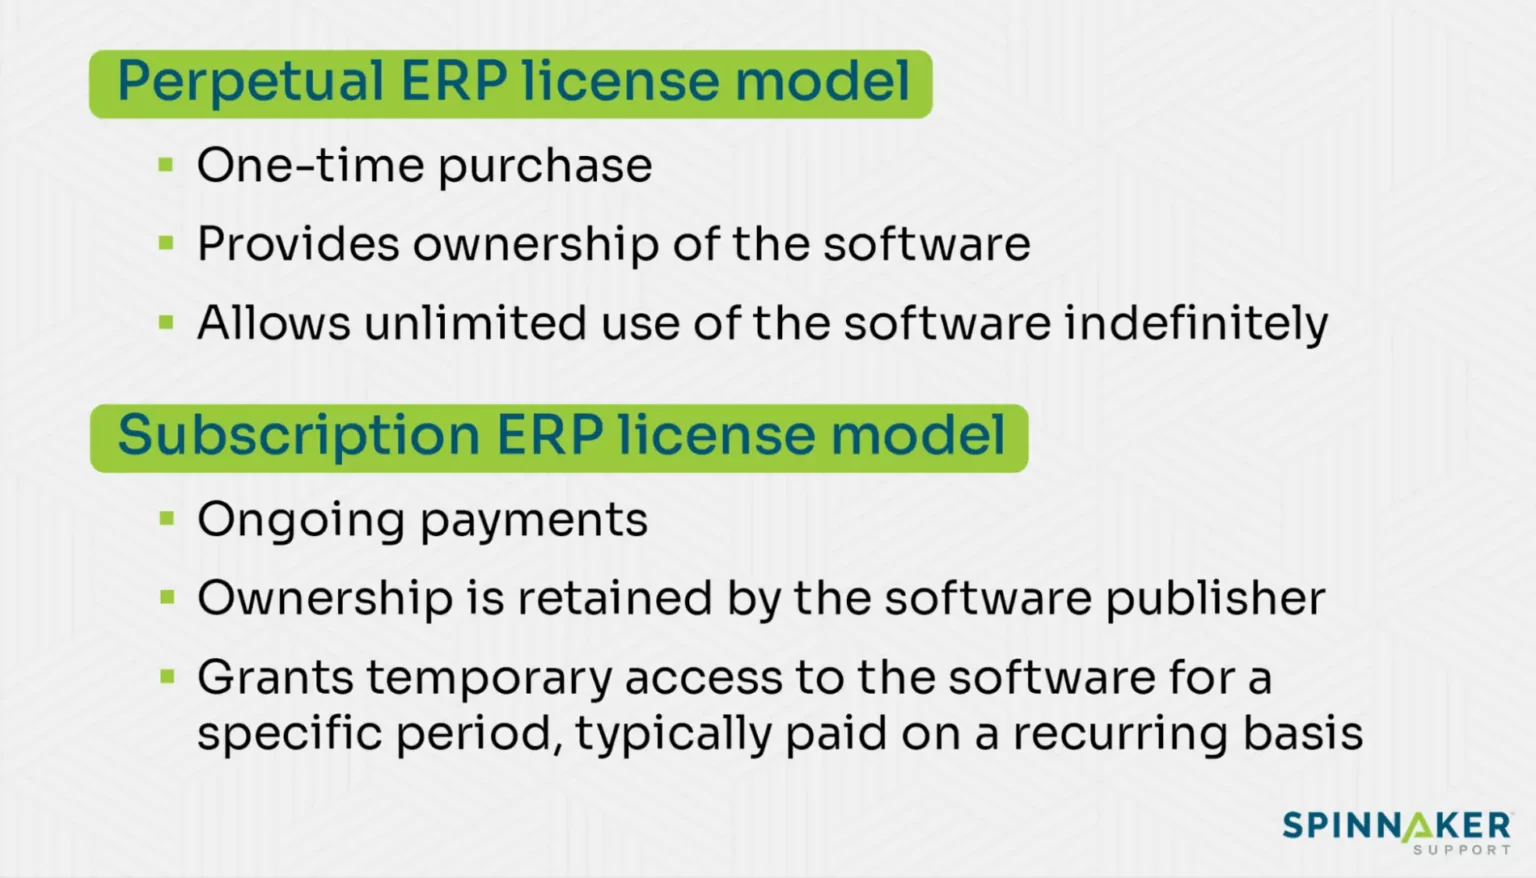 Difference between perpetual and subscription ERP license model